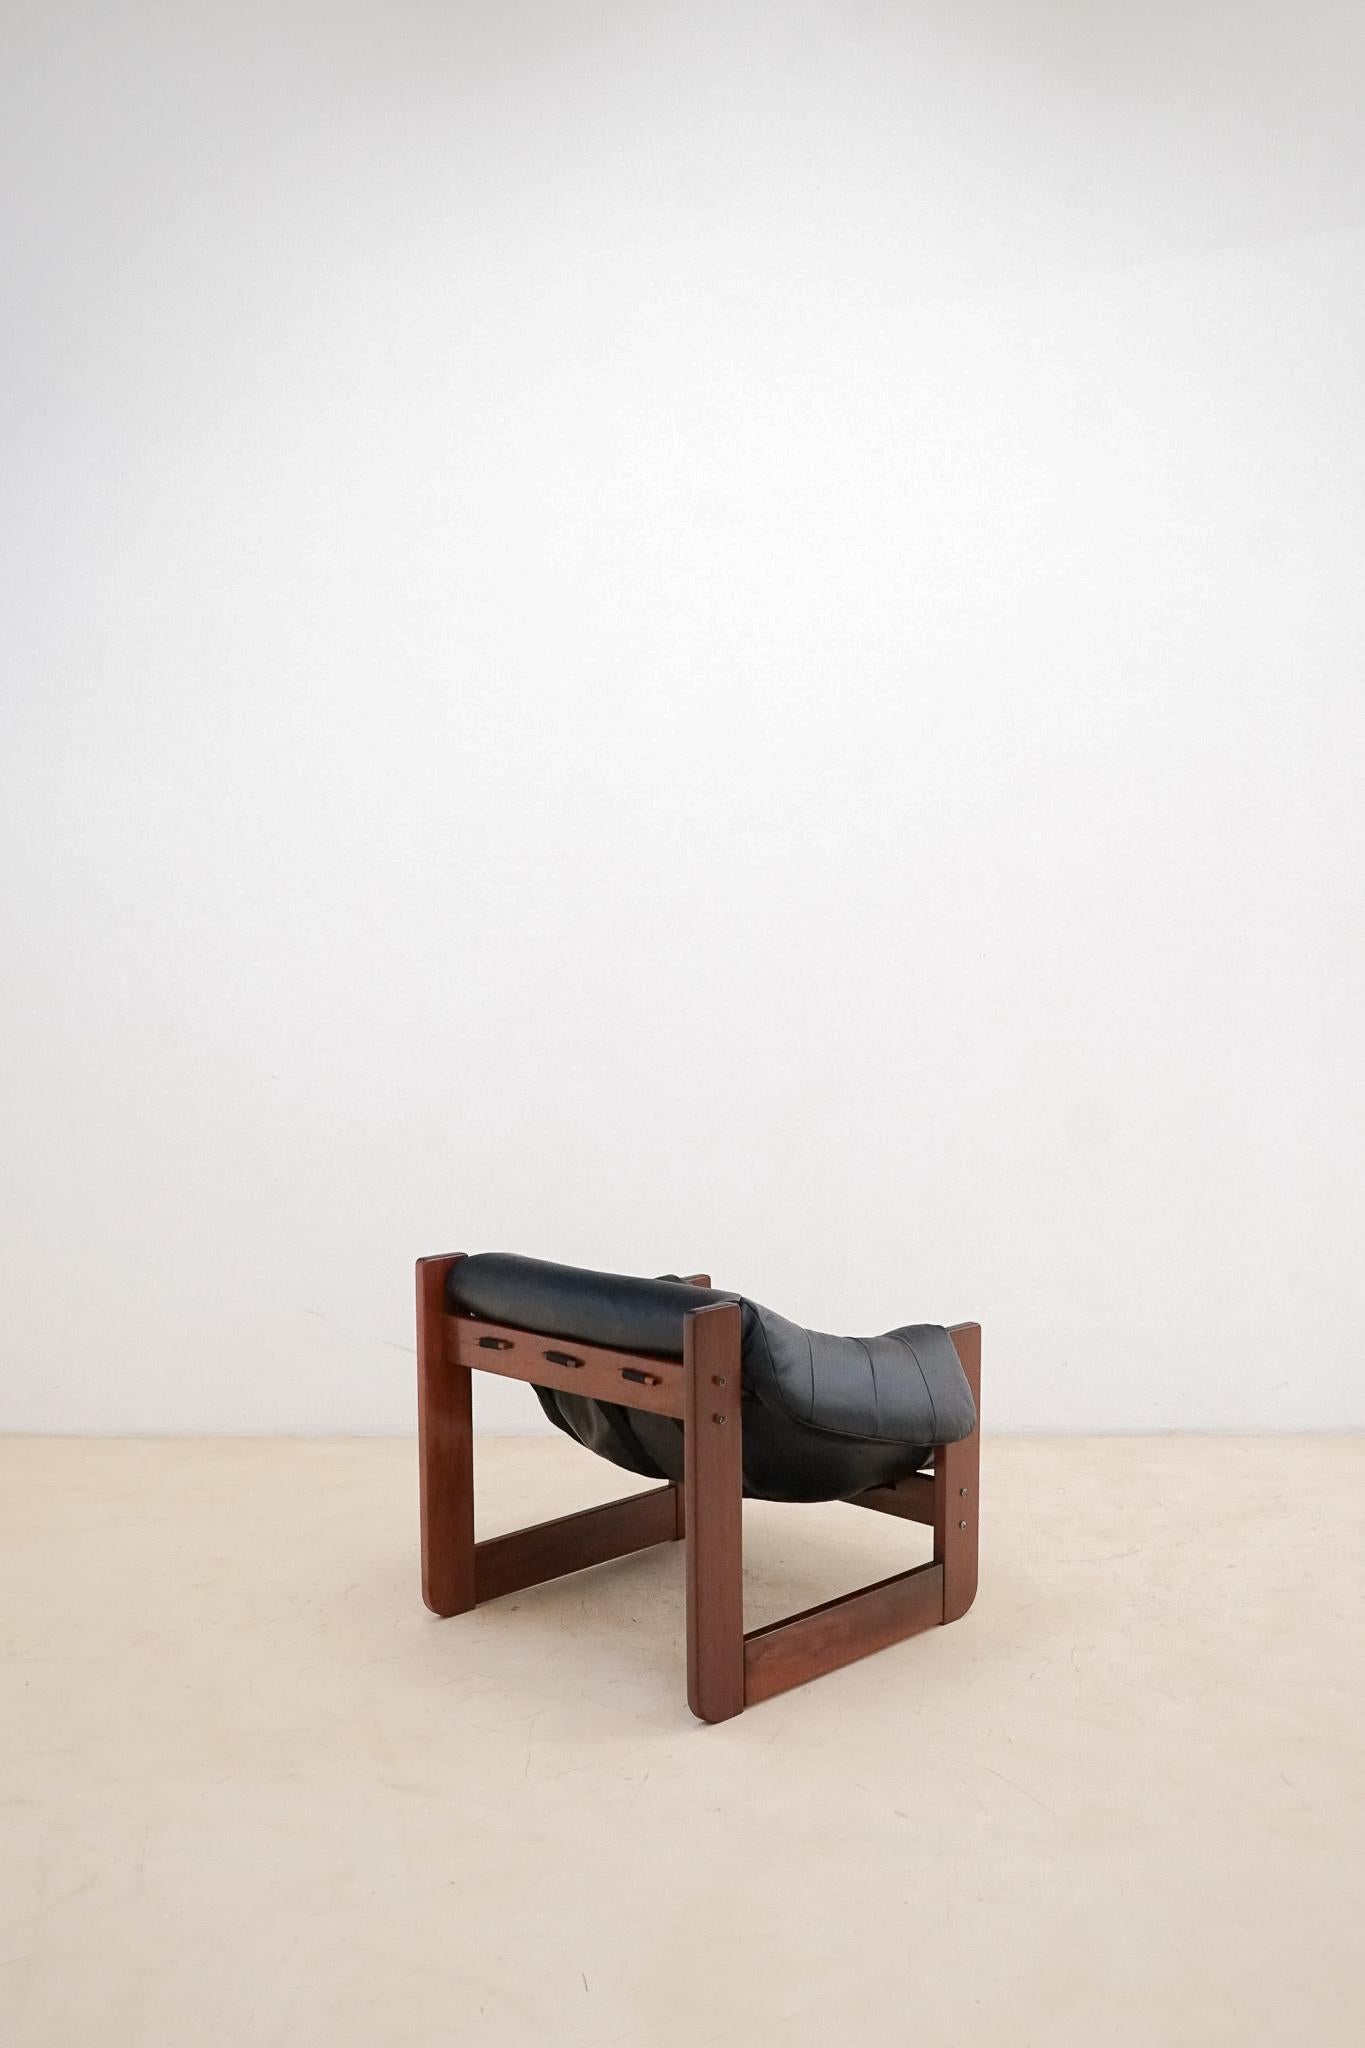 Leather Pair of MP-97 Lounge Chairs by Percival Lafer, 1970s, Brazilian Midcentury